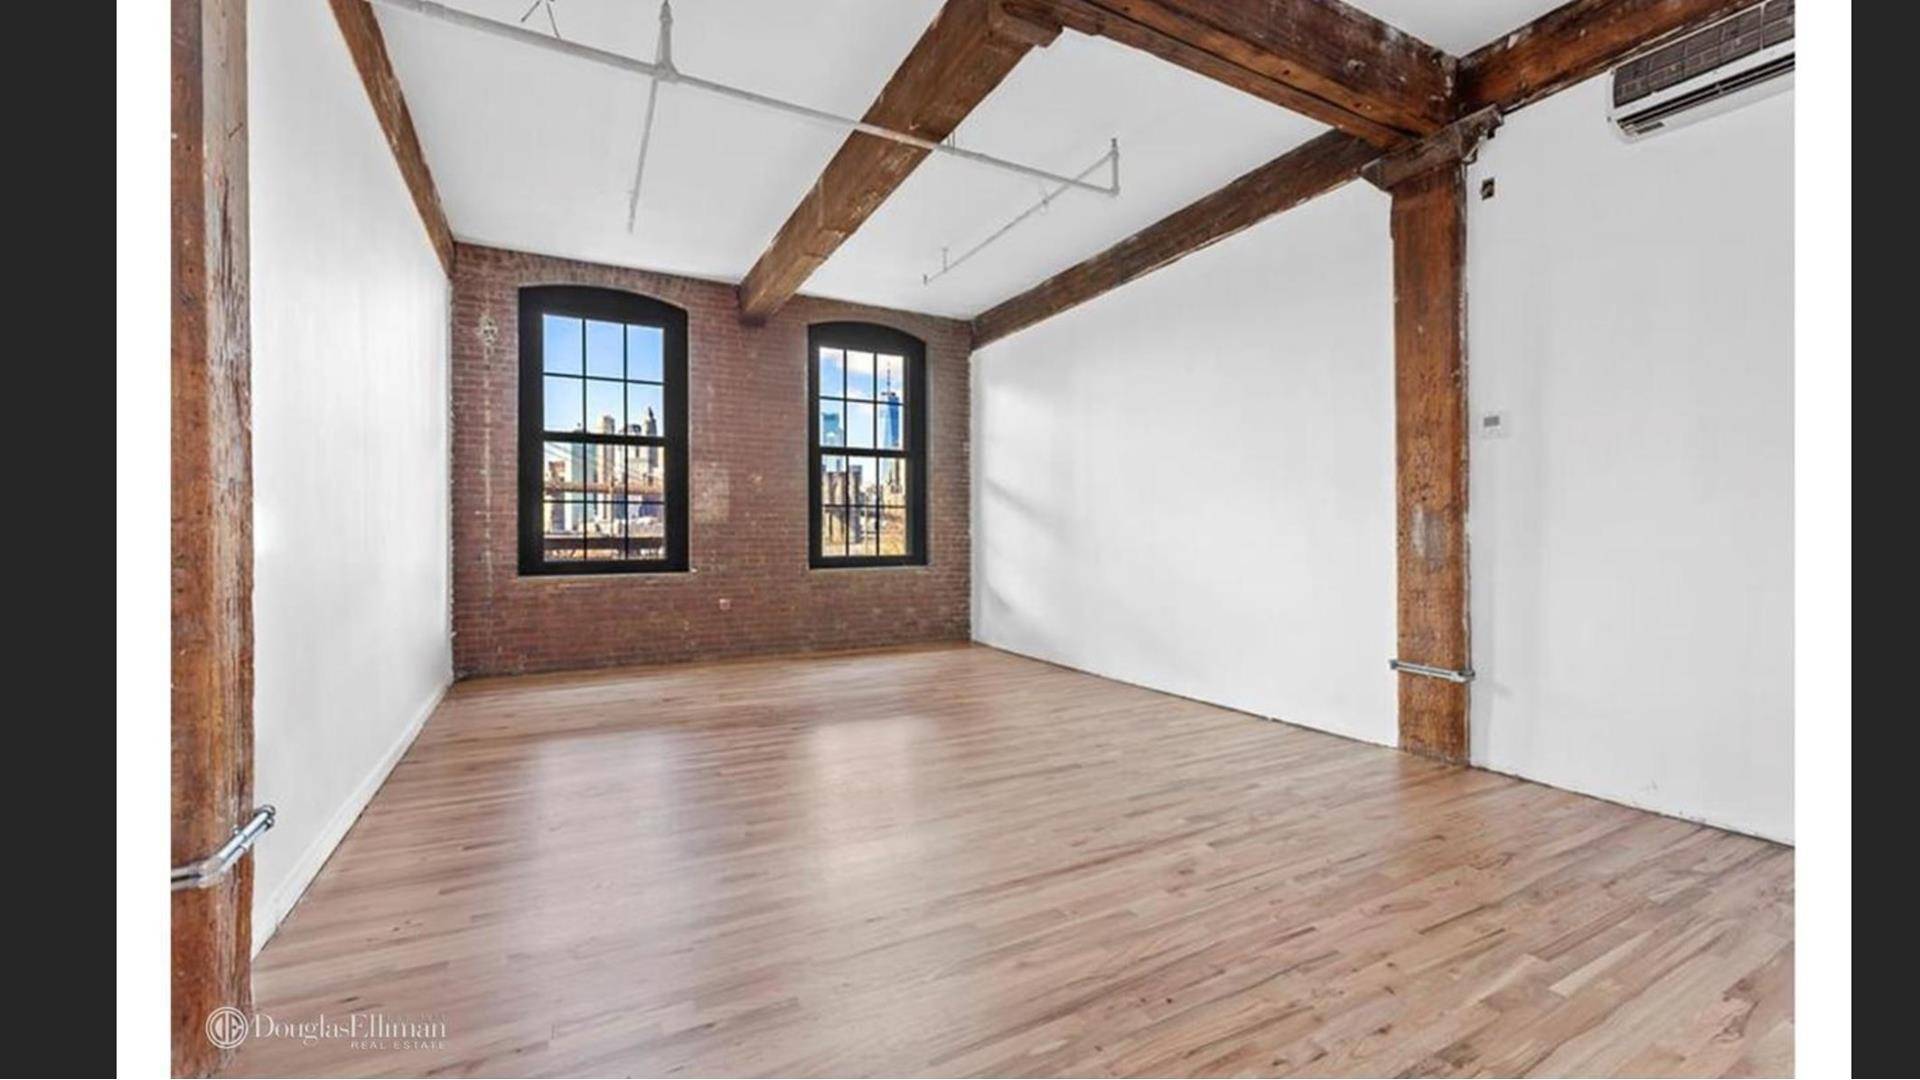 Extremely large, newly renovated studio loft with exposed wooden beans, soundproof windows, high ceilings and Manhattan views !